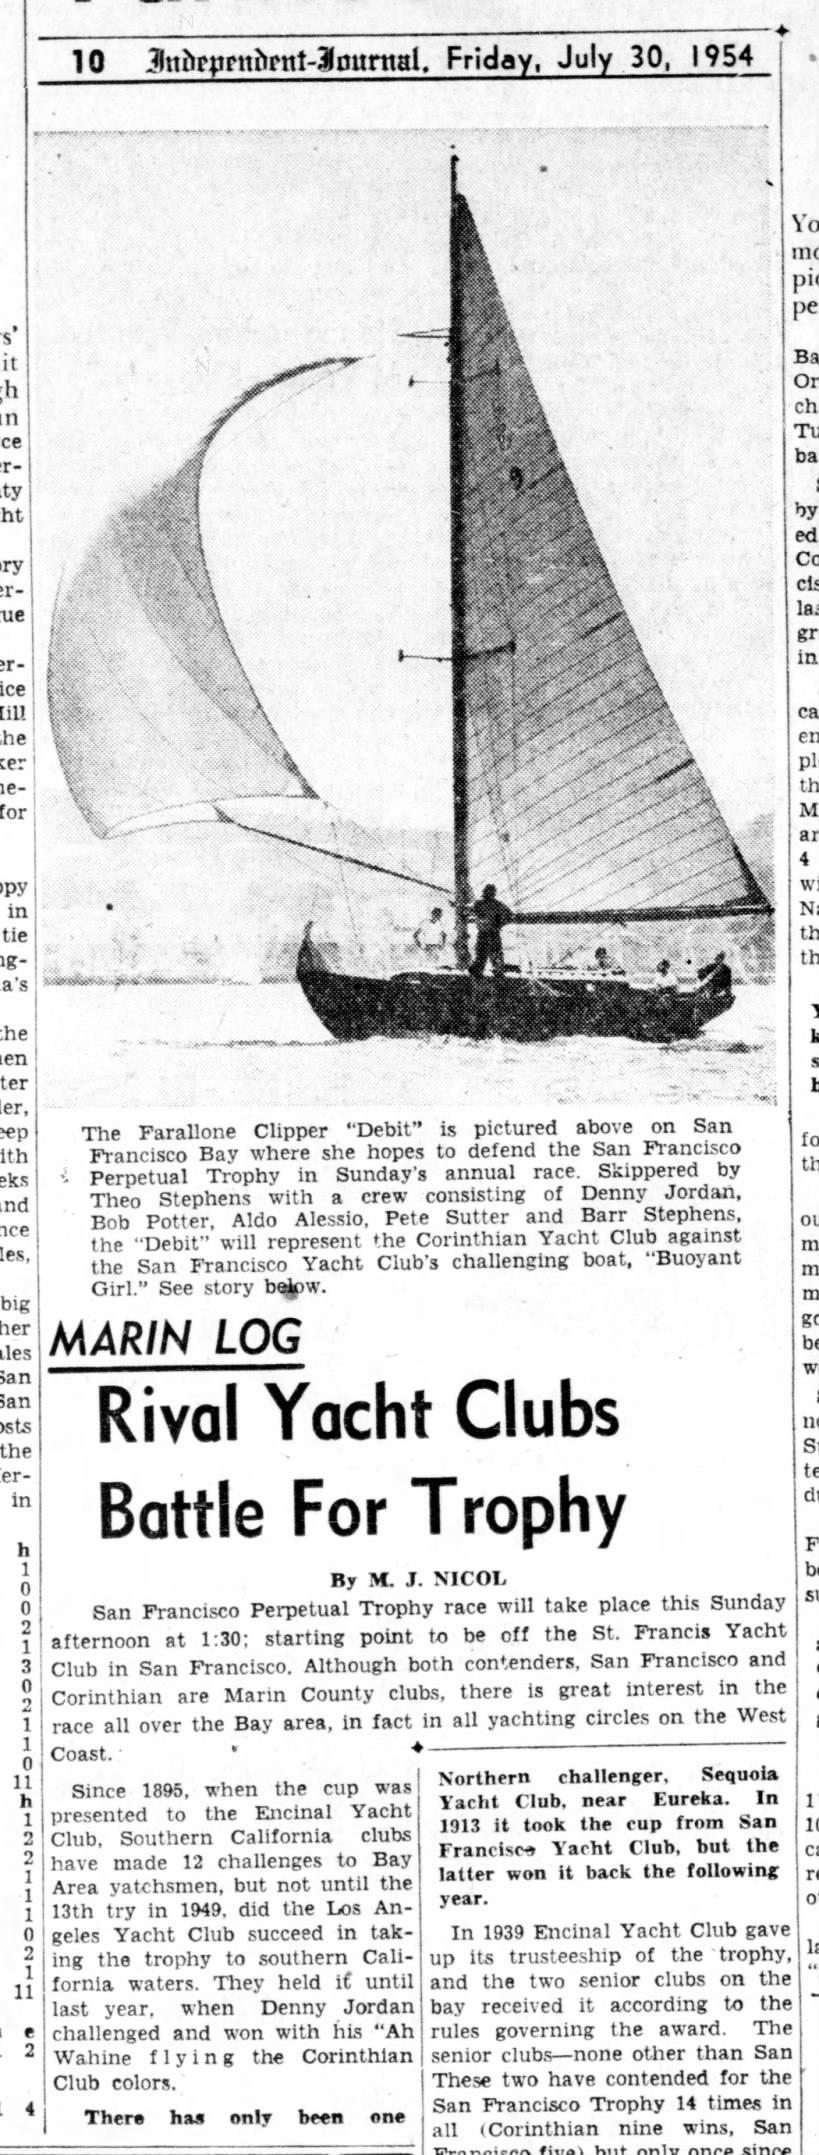 30 Jul 1954 Daily Ind Jnl "Rival Yacht Clubs Battle for Trophy" (FC photo)